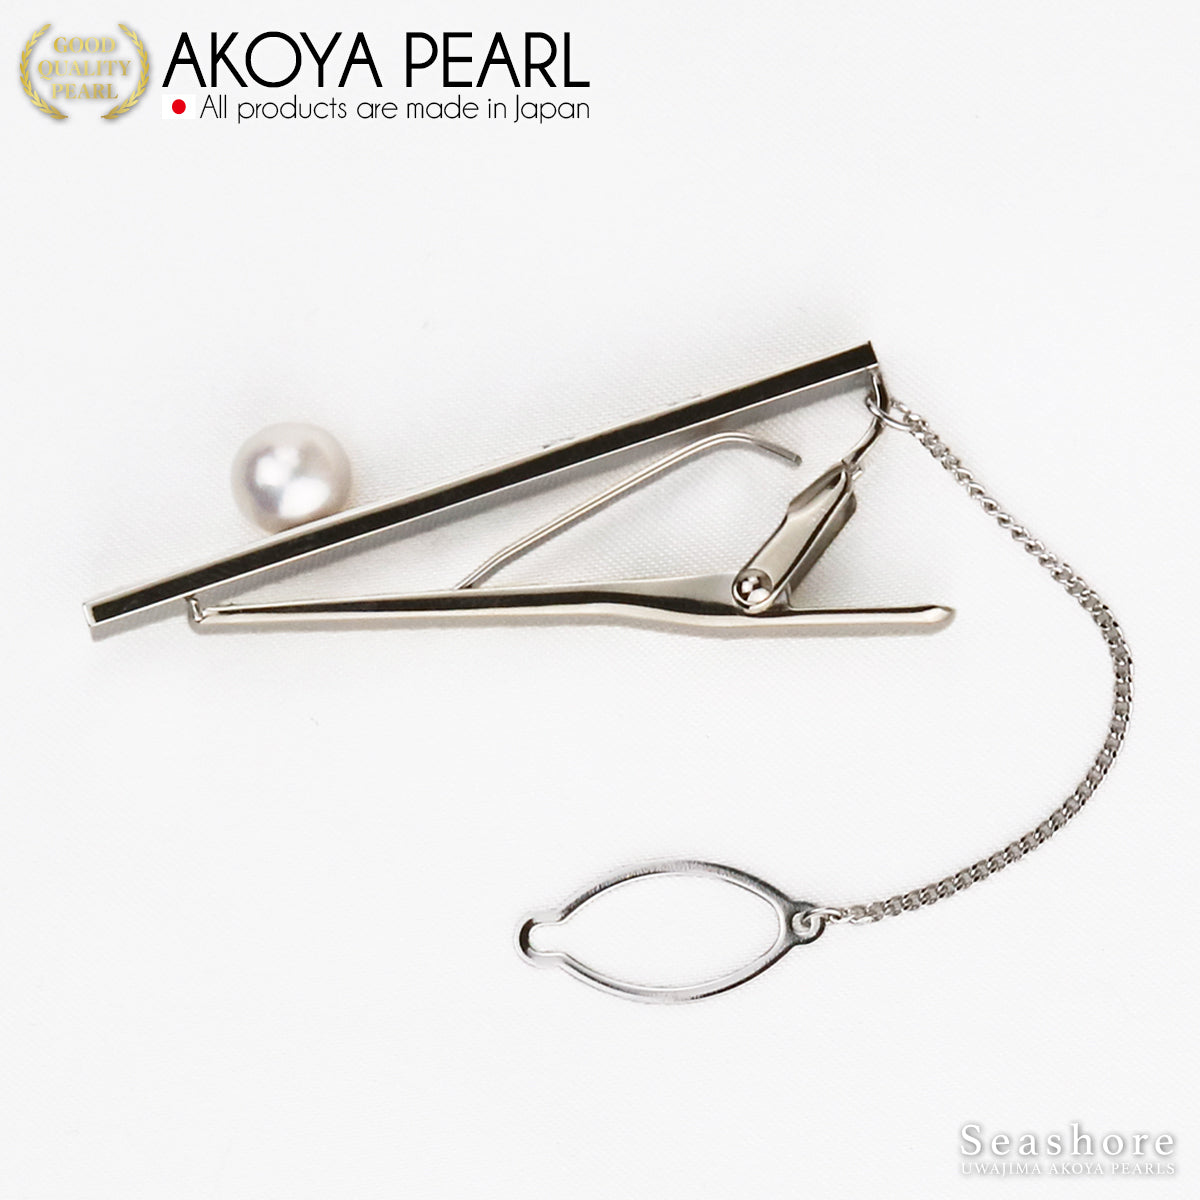 Pearl Tie Pin Tie Bar Men's Brass White 7.5-8.0mm Akoya Pearl Storage Case Included (3930)